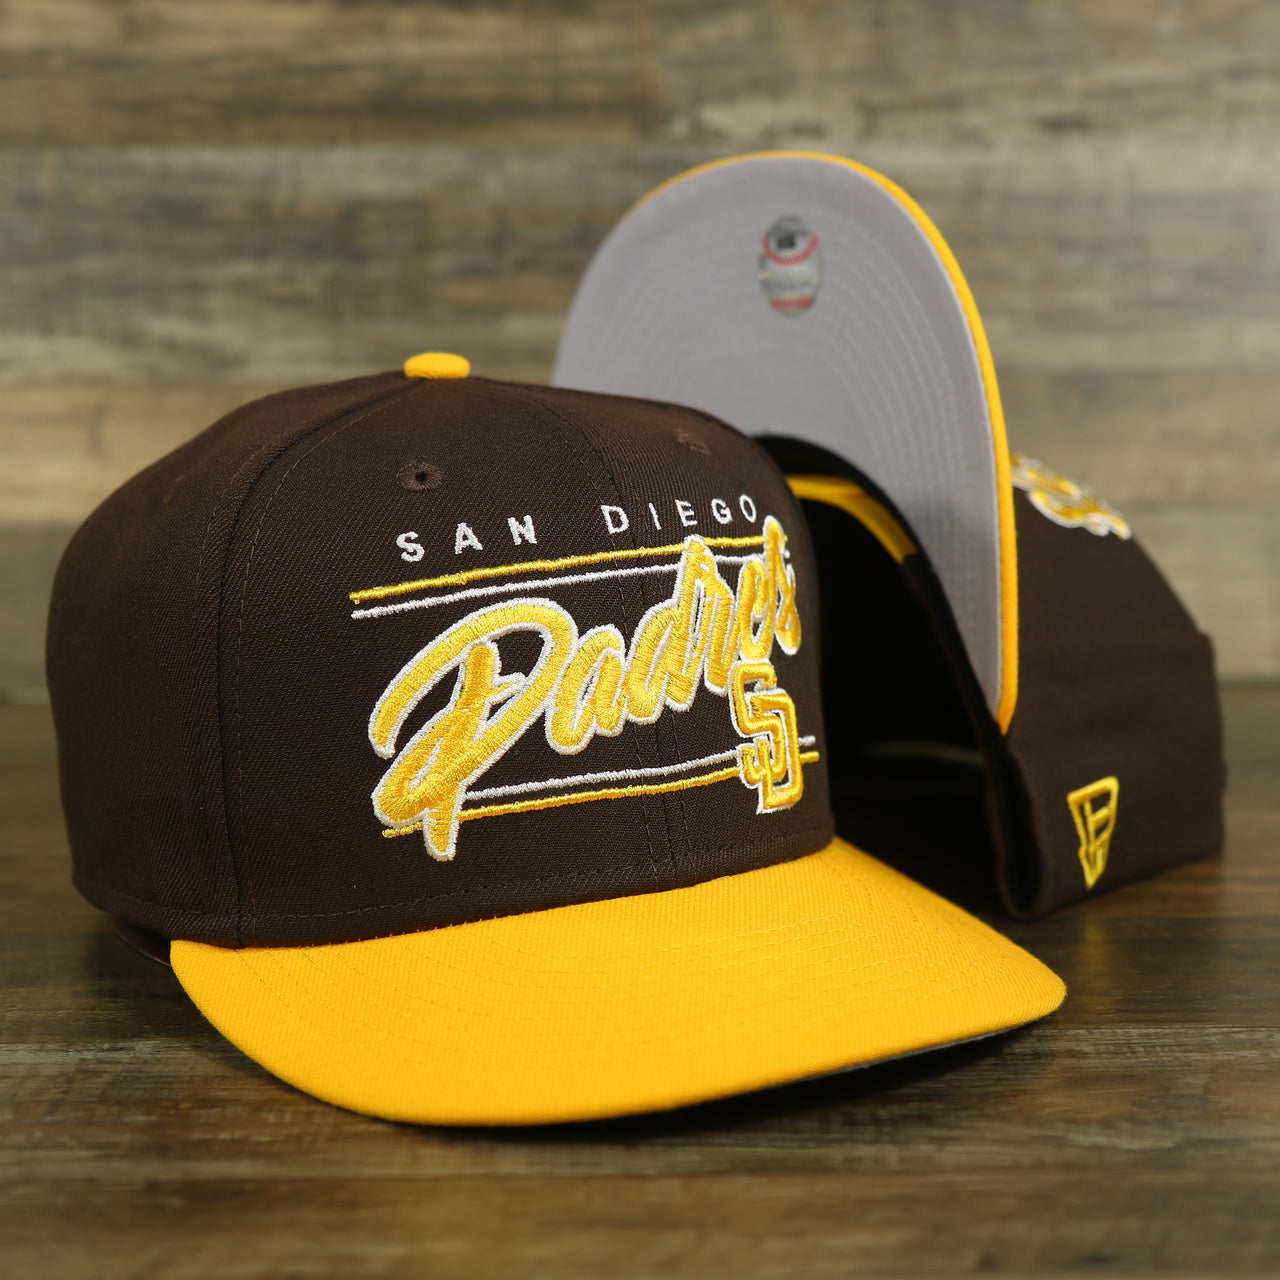 San Diego Padres "Team Script" College Bar 9Fifty Snapback Hat | Brown/Yellow Steelers 950 Snap Cap